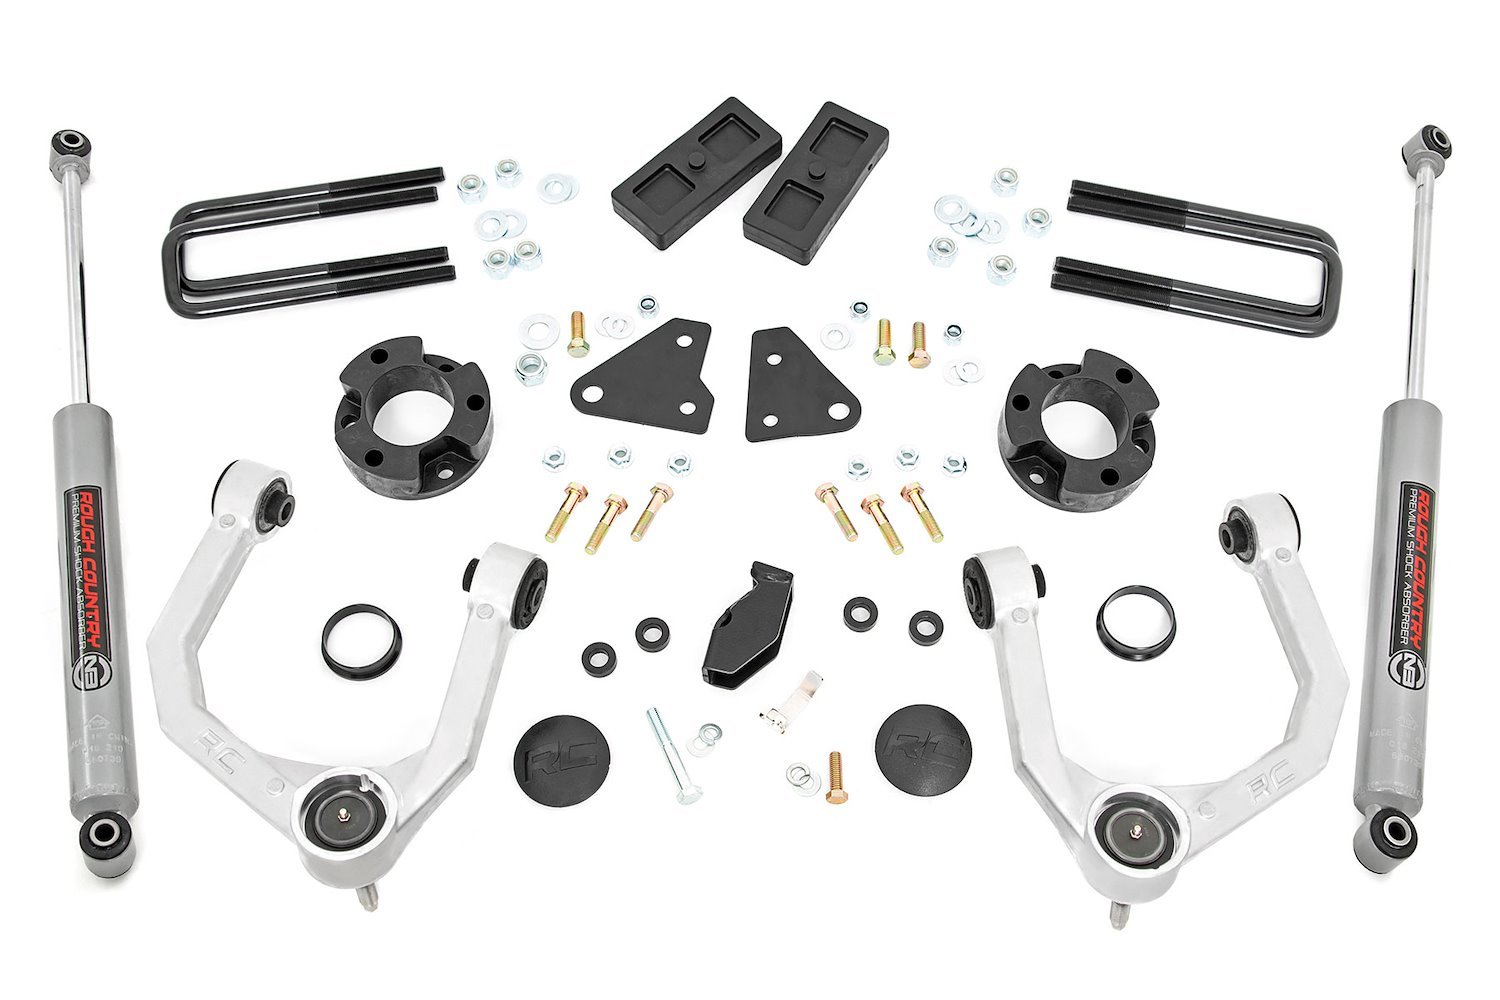 500011 3.5 in. Lift Kit, N3, Cast Steel Knuckles, Fits Select Ford Ranger